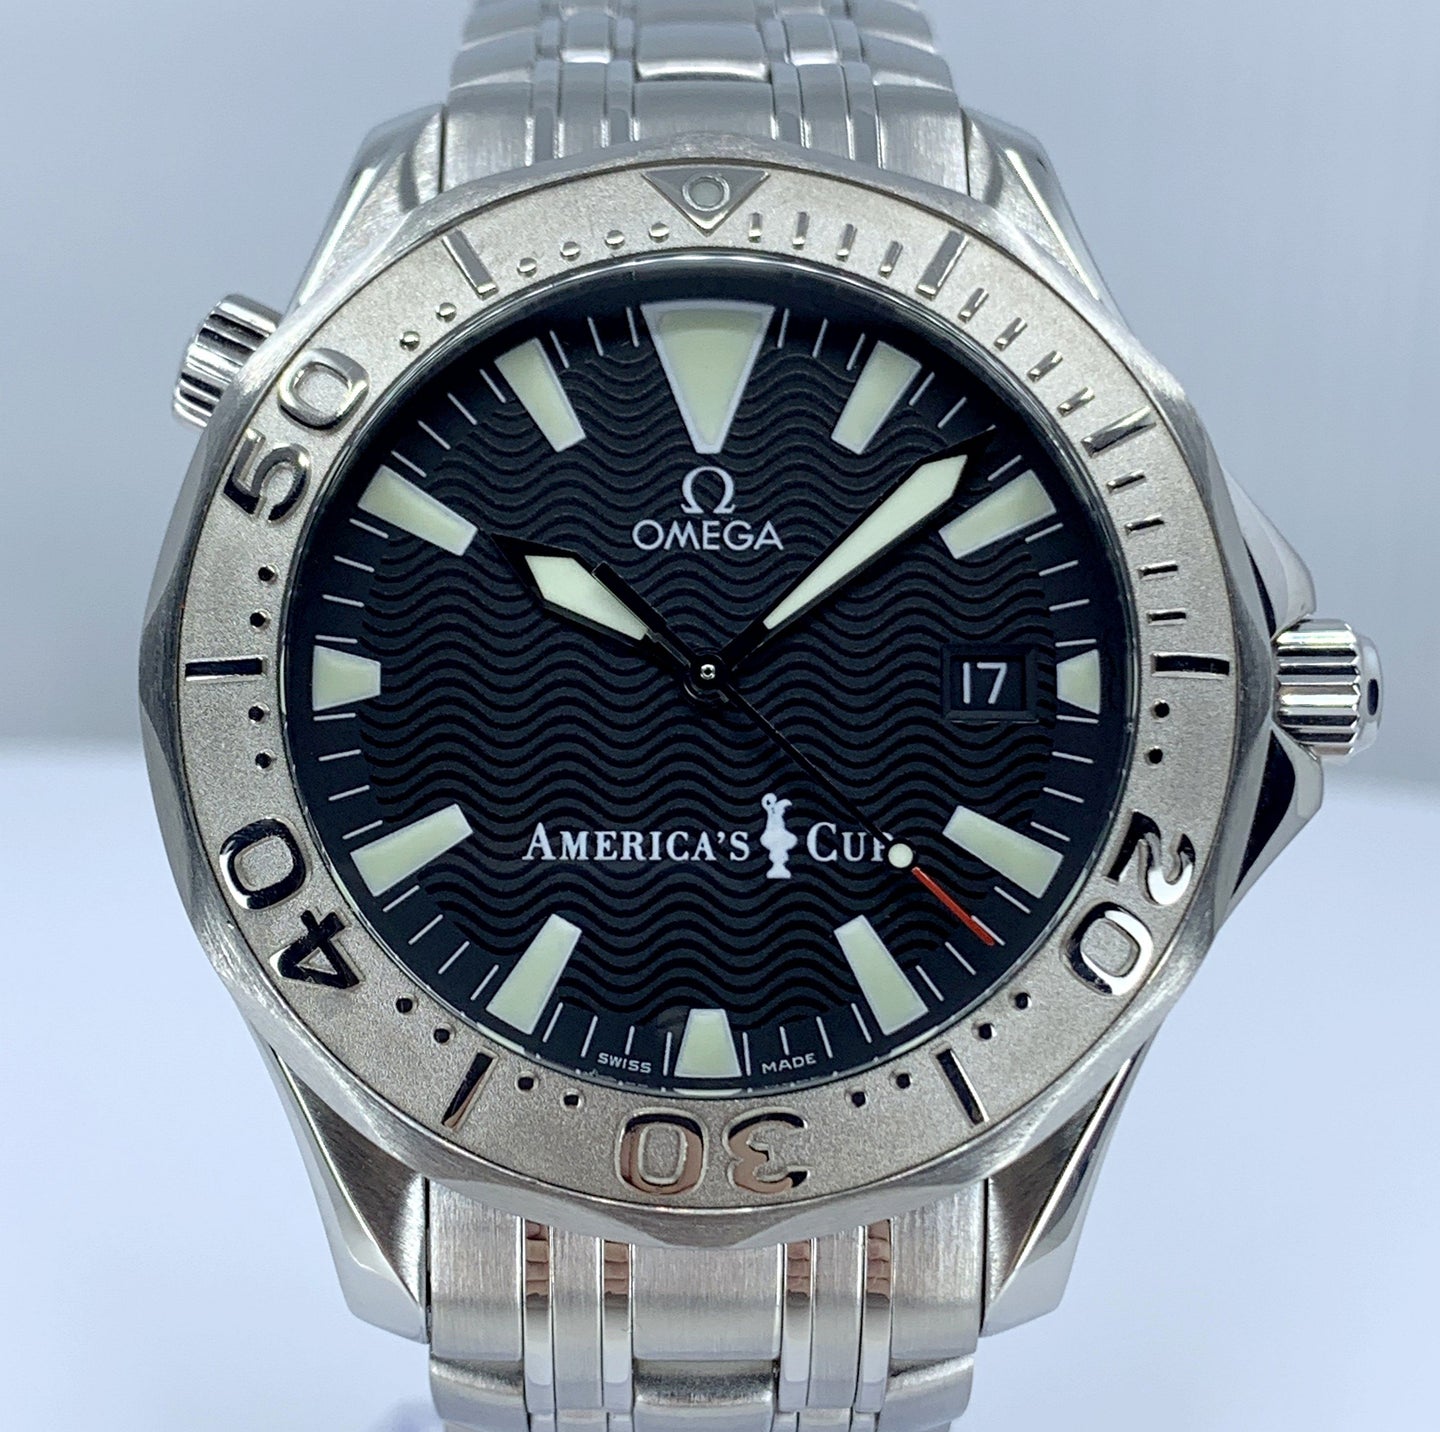 Omega Seamaster Diver 300M America's Cup Limited Edition